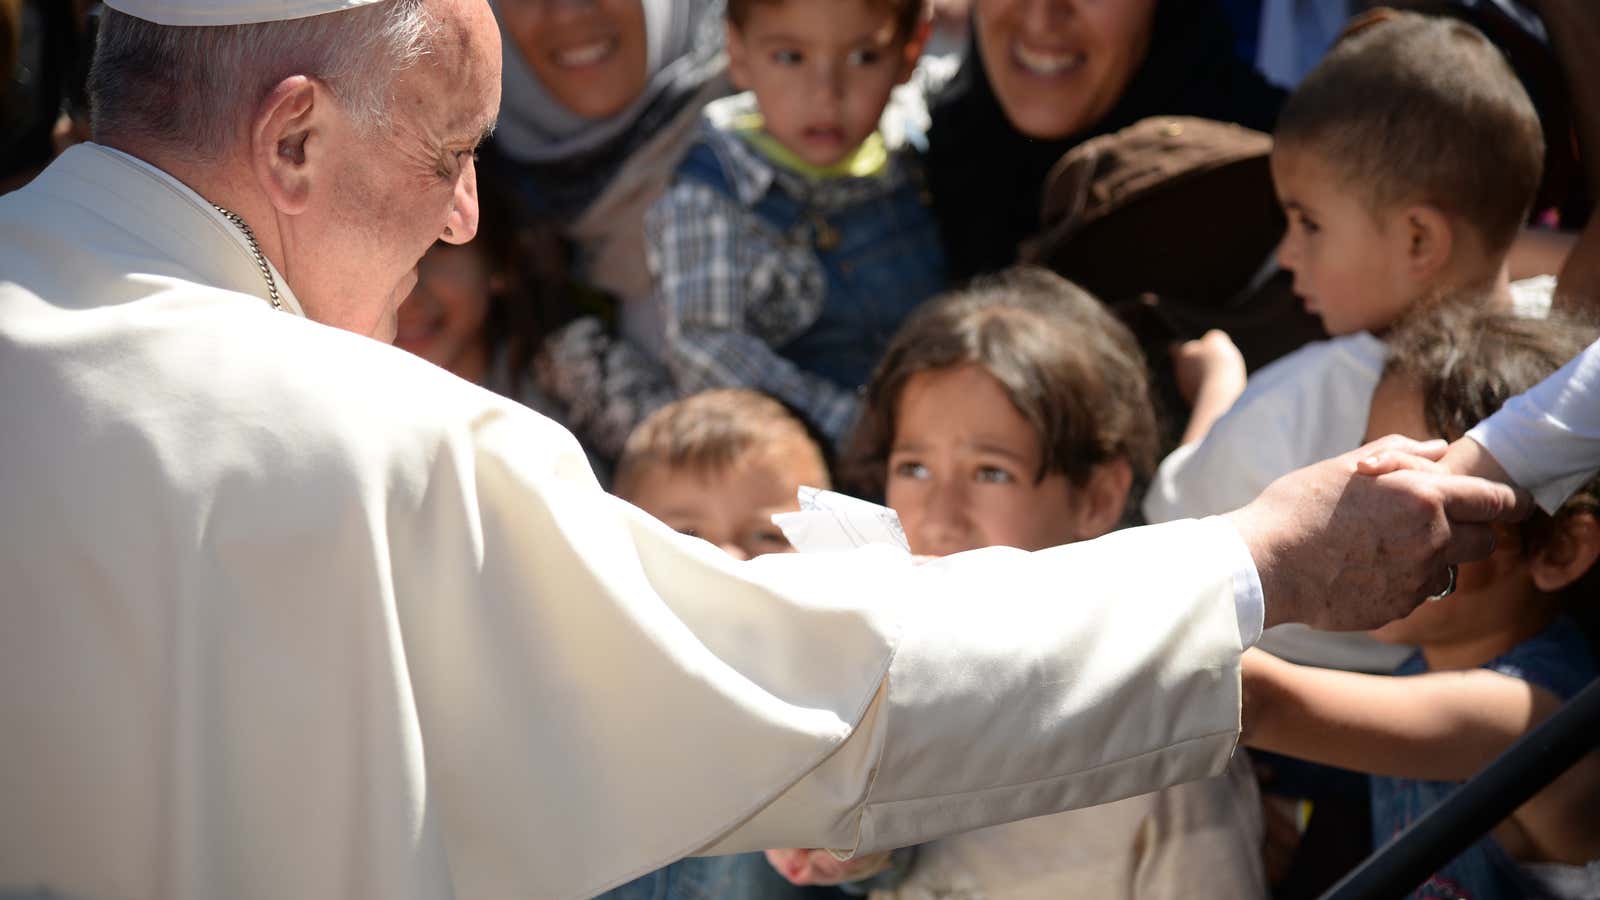 “Do not lose hope,” the Pope told people at the Moria refugee camp.